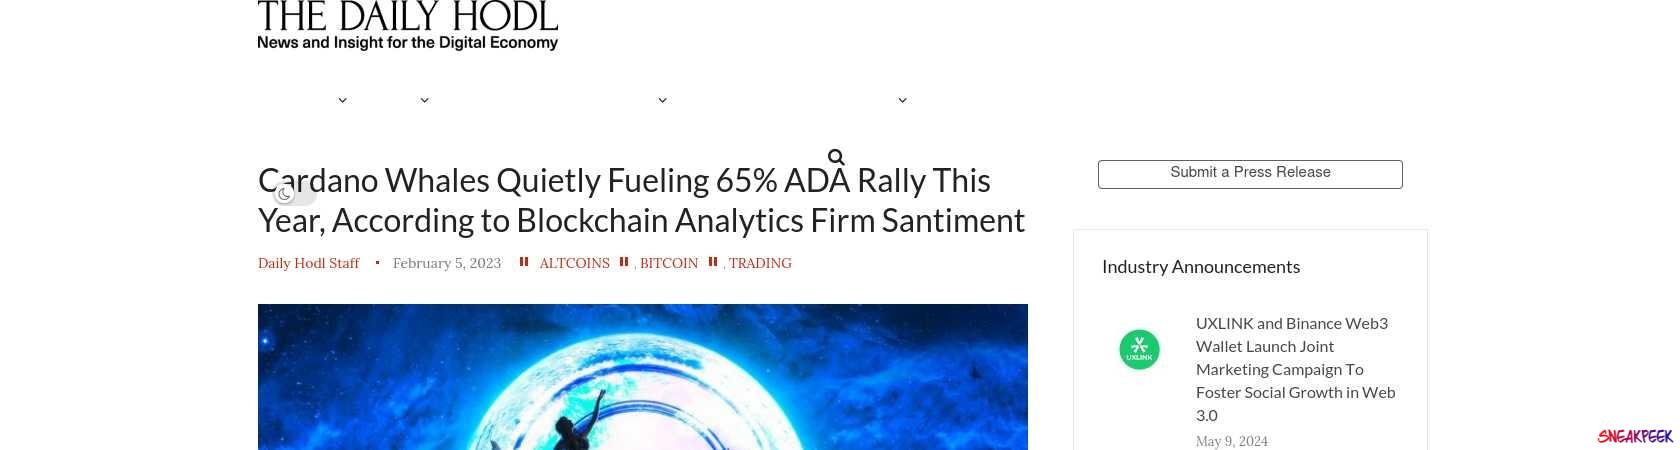 Read the full Article:  ⭲ Cardano Whales Quietly Fueling 65% ADA Rally This Year, According to Blockchain Analytics Firm Santiment